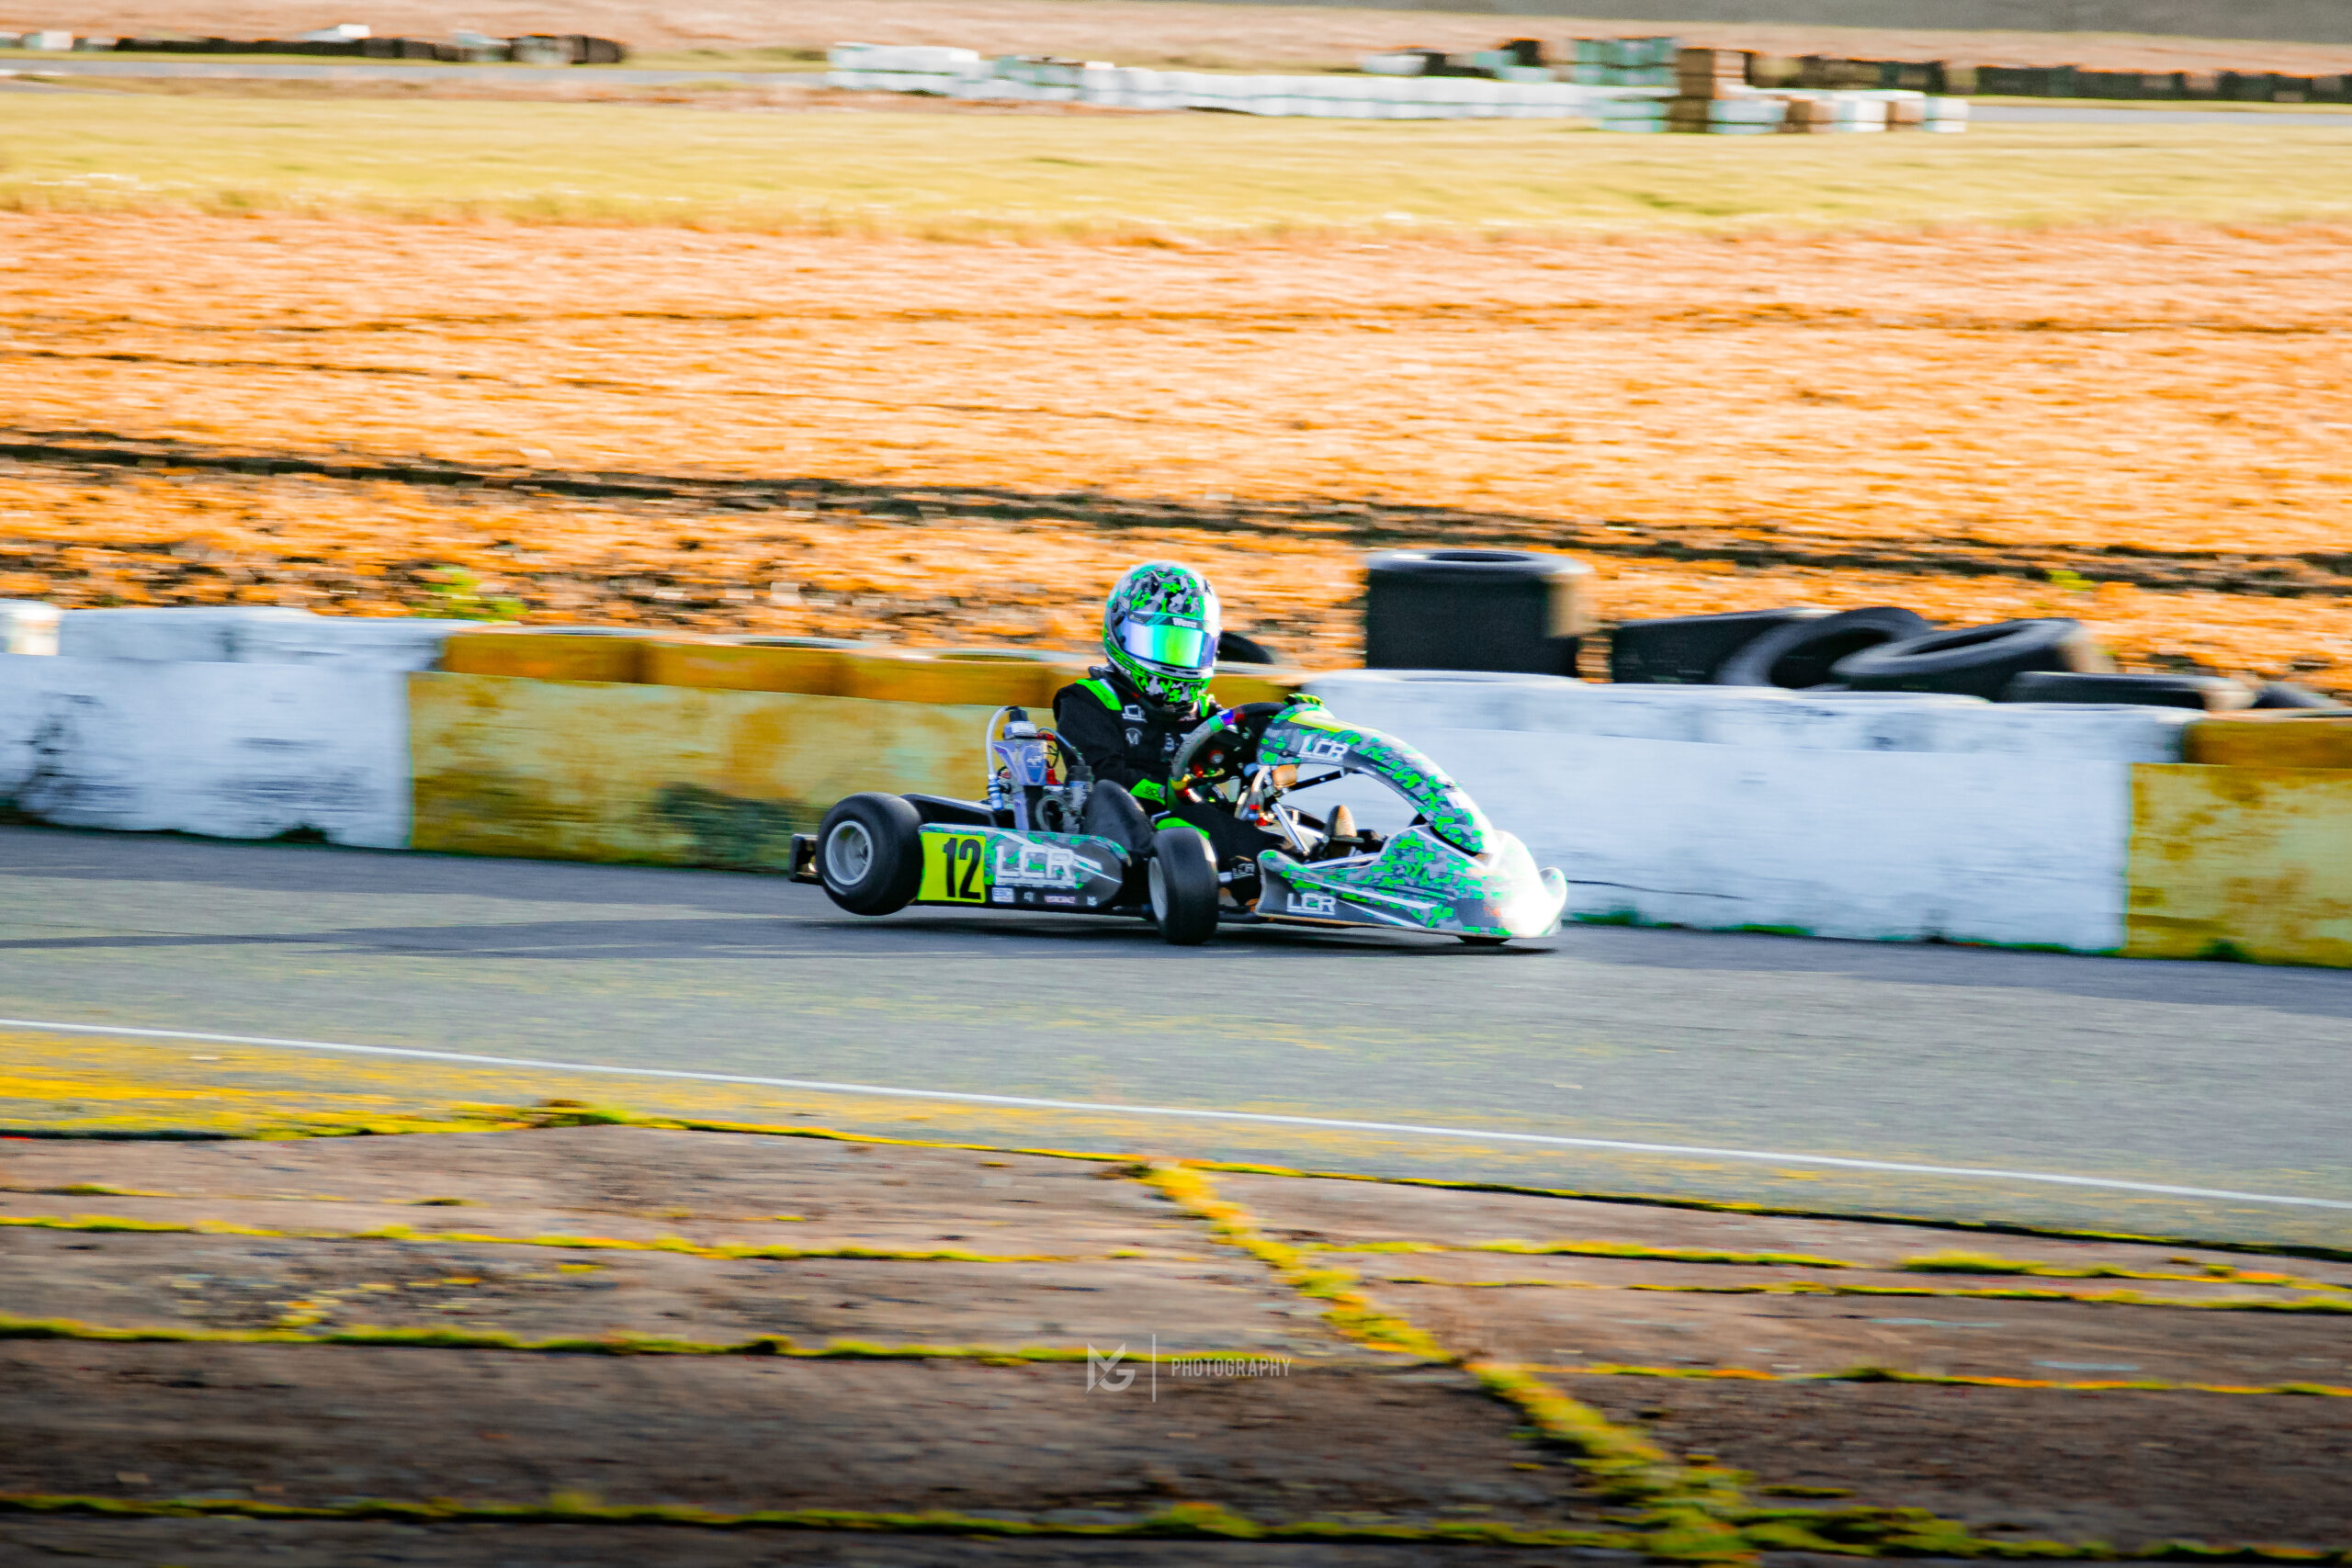 EBC-Equipped Max Wheatley Battles It Out in Debutant Euro Kart Race